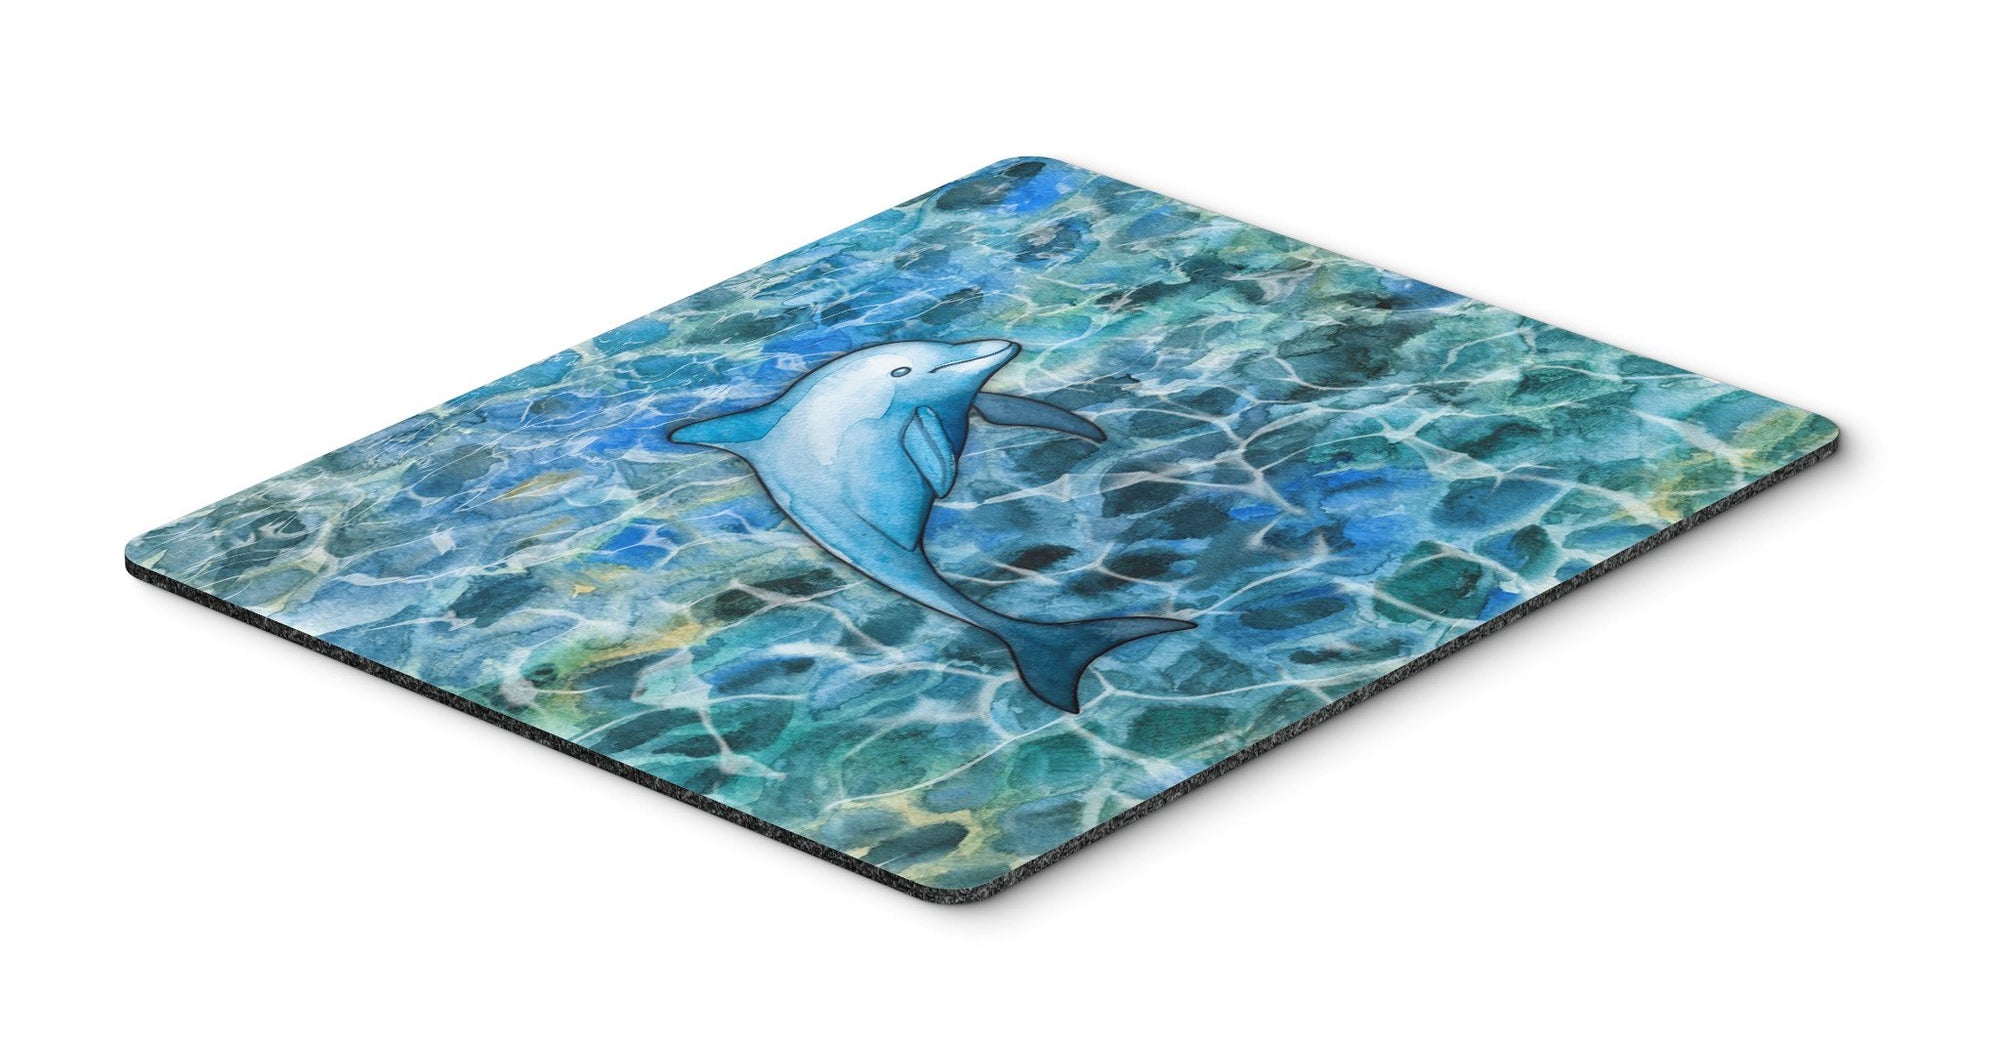 Dolphin Mouse Pad, Hot Pad or Trivet BB5356MP by Caroline's Treasures